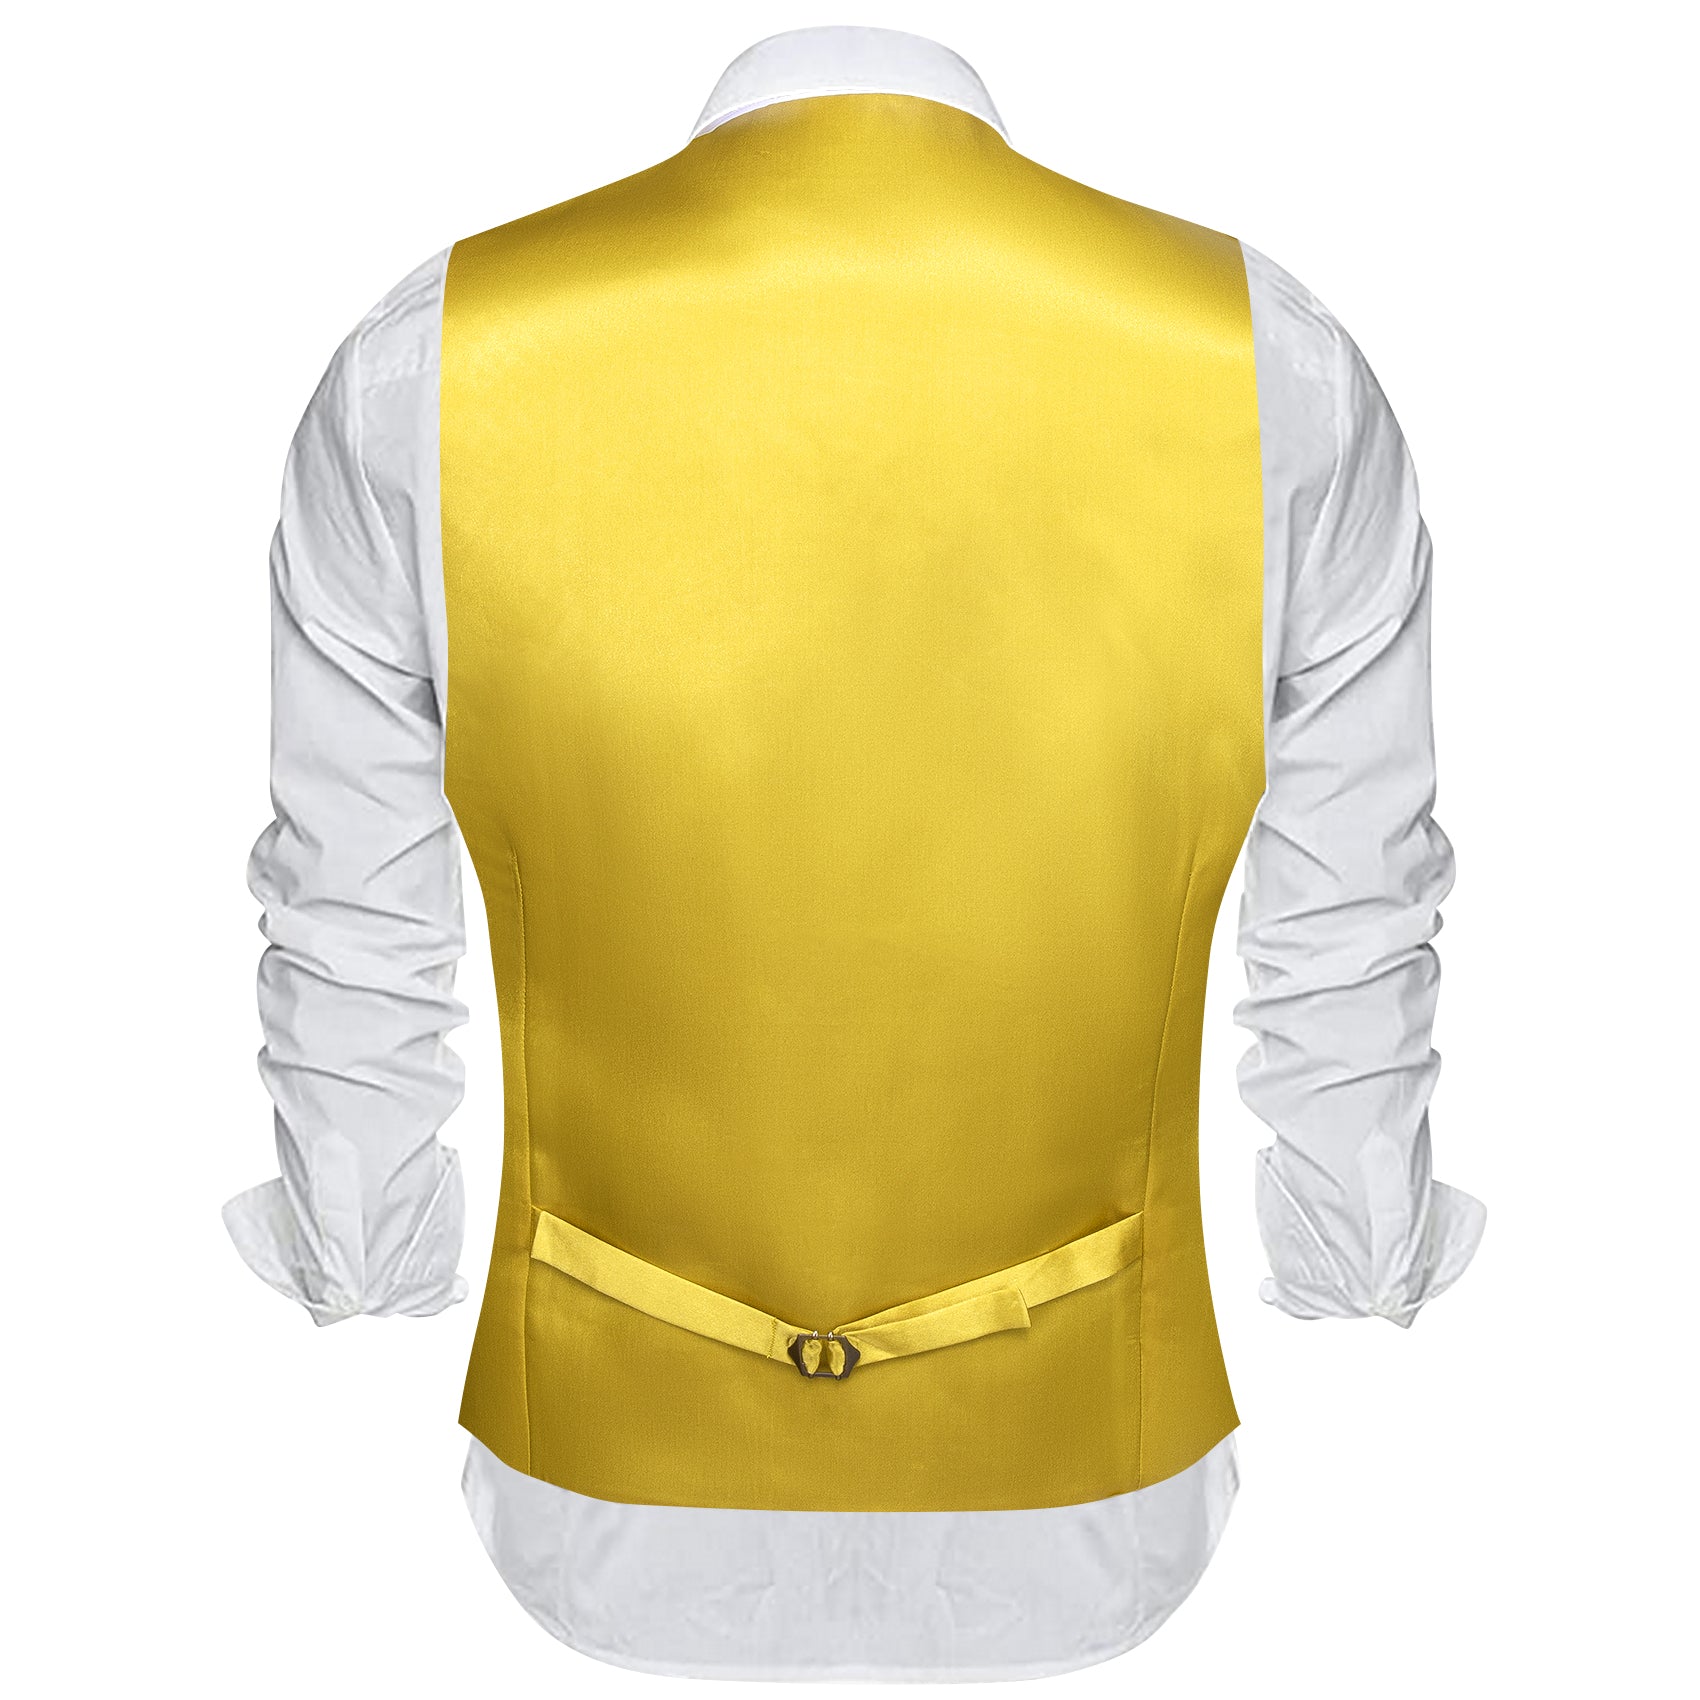 Yellow Solid Silk Waistcoat Vest for Party